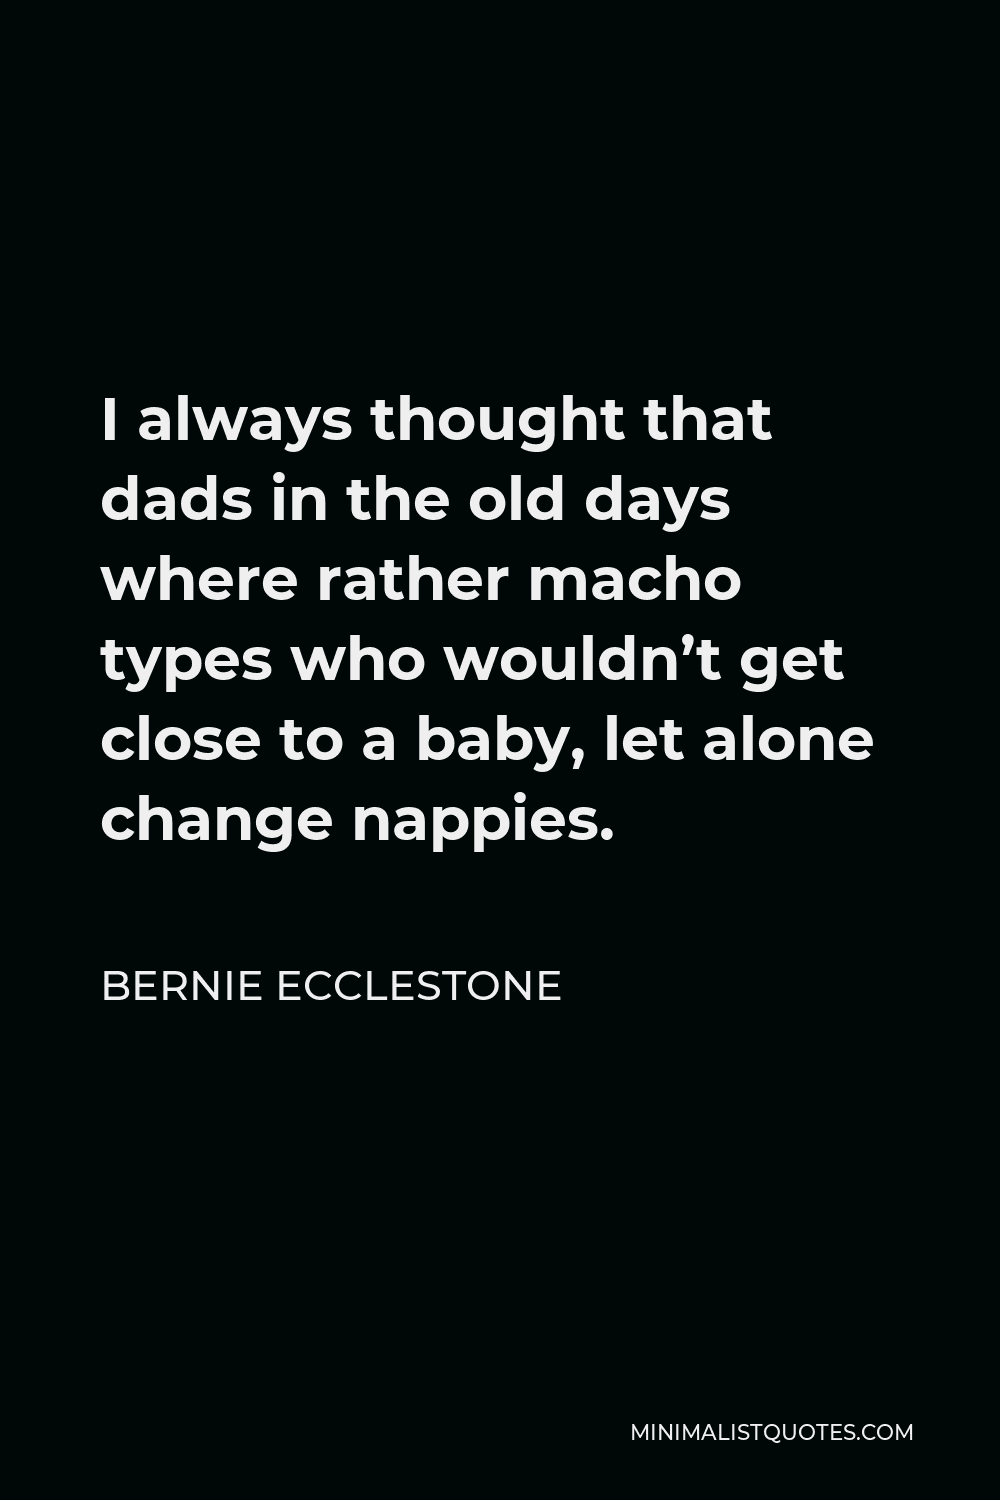 Bernie Ecclestone Quote - I always thought that dads in the old days where rather macho types who wouldn’t get close to a baby, let alone change nappies.